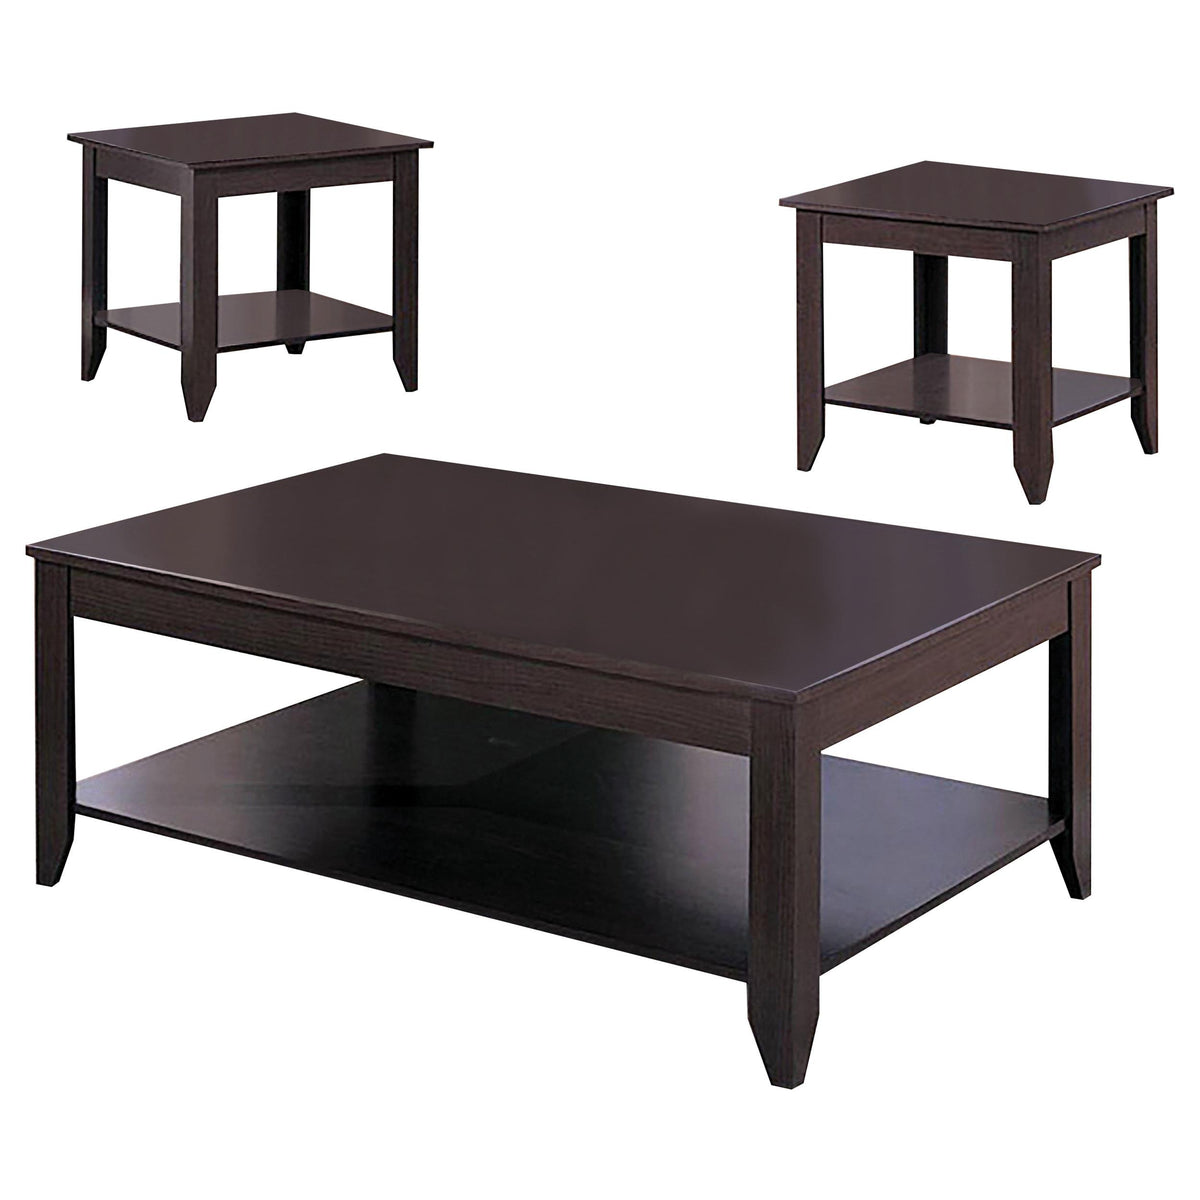 Brooks 3-piece Occasional Table Set with Lower Shelf Cappuccino Brooks 3-piece Occasional Table Set with Lower Shelf Cappuccino Half Price Furniture